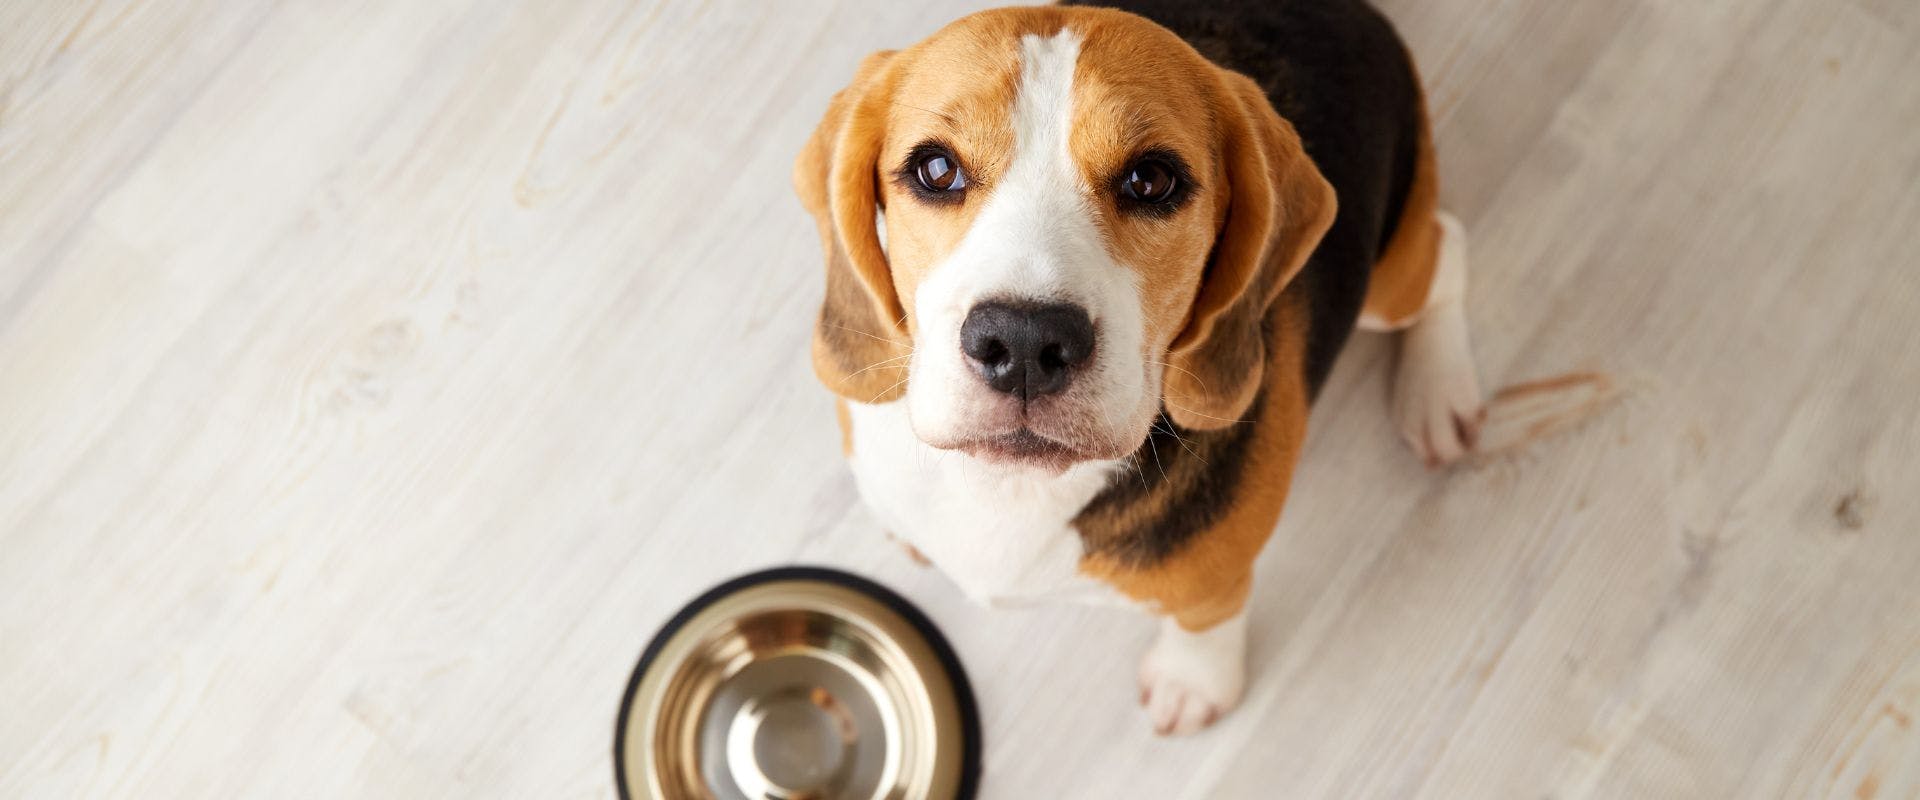 Beagle waiting for food